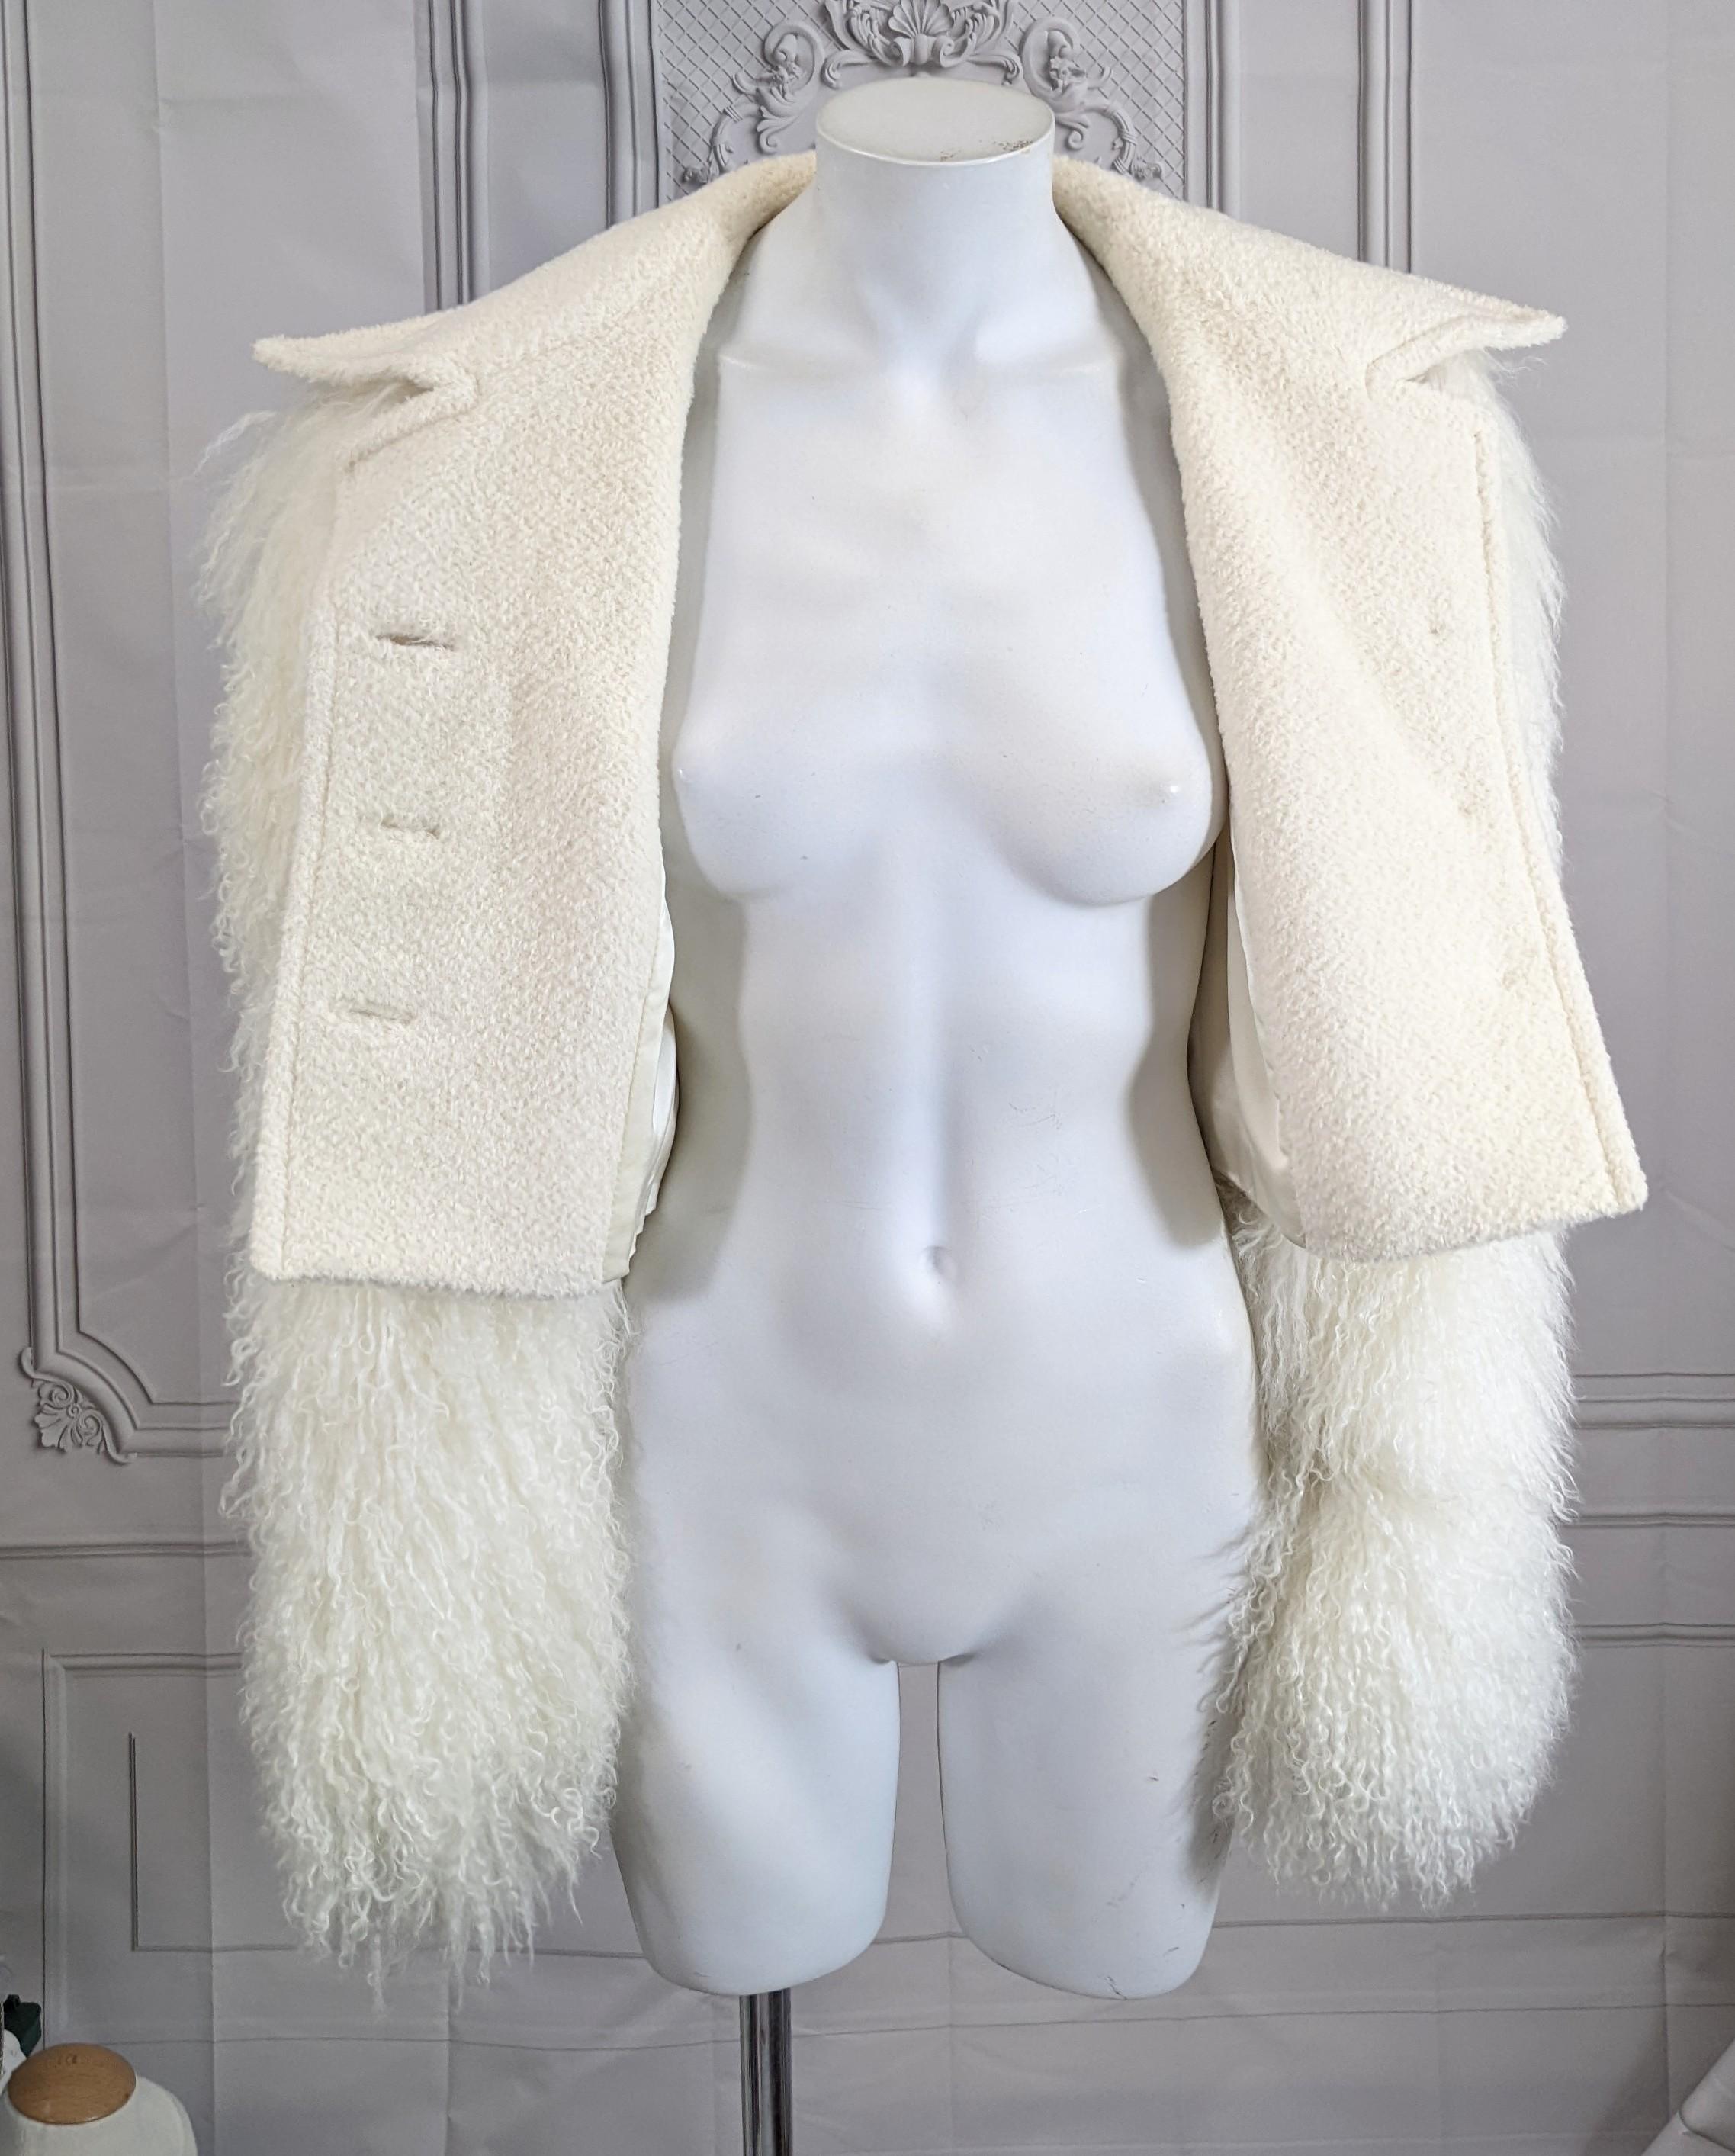 Christian Dior Haute Couture by Gianfranco Ferre For Sale 5